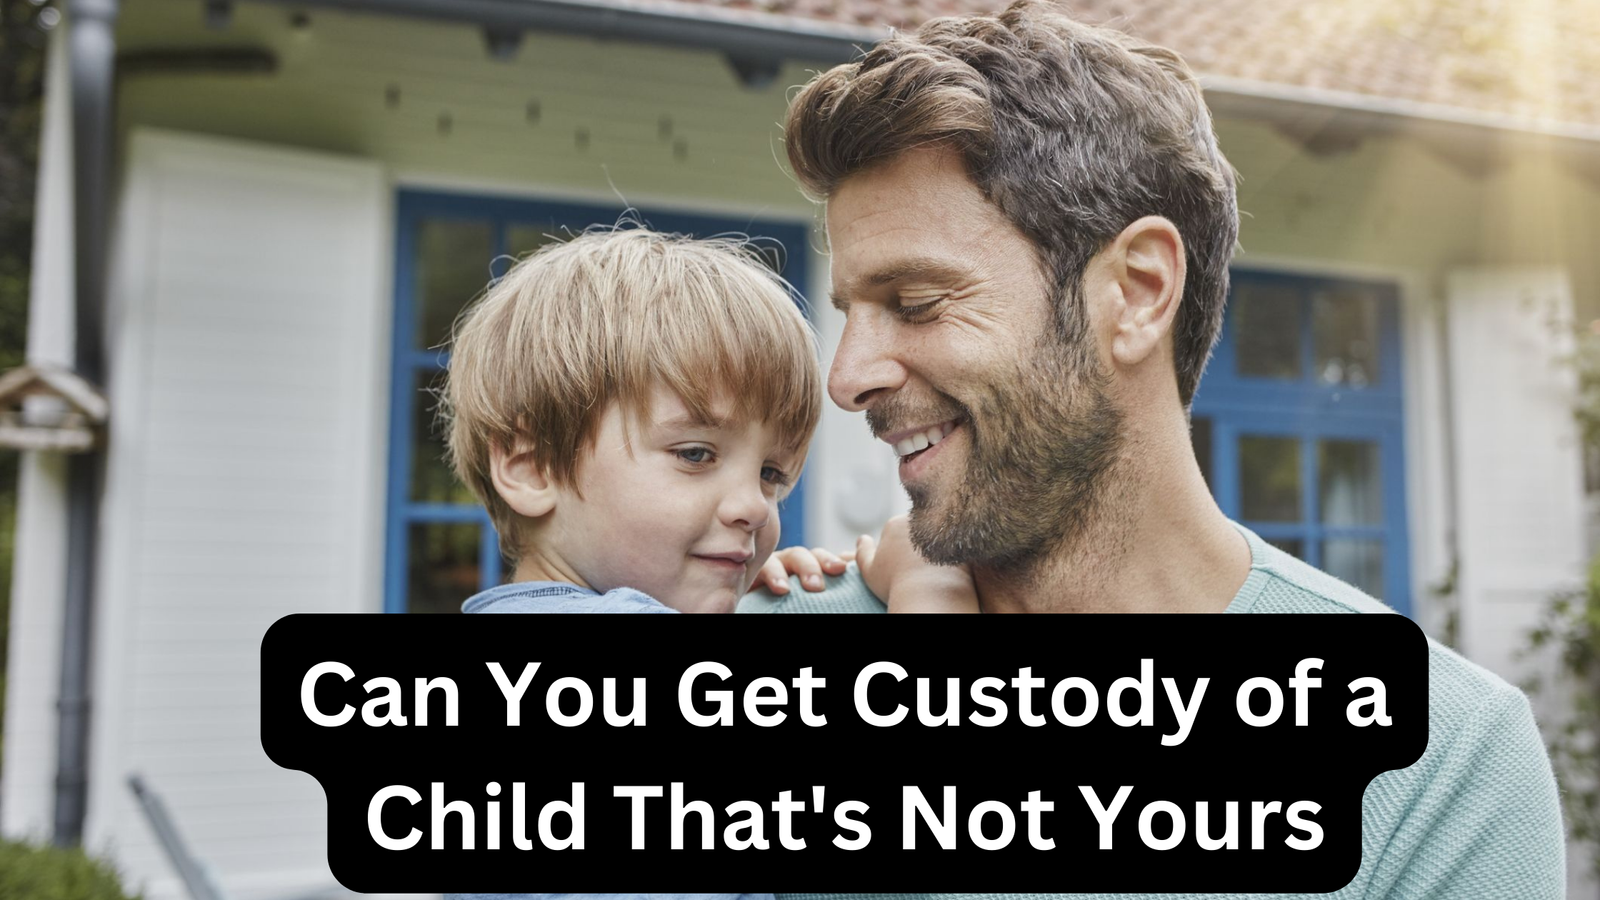 Can You Get Custody of a Child That's Not Yours